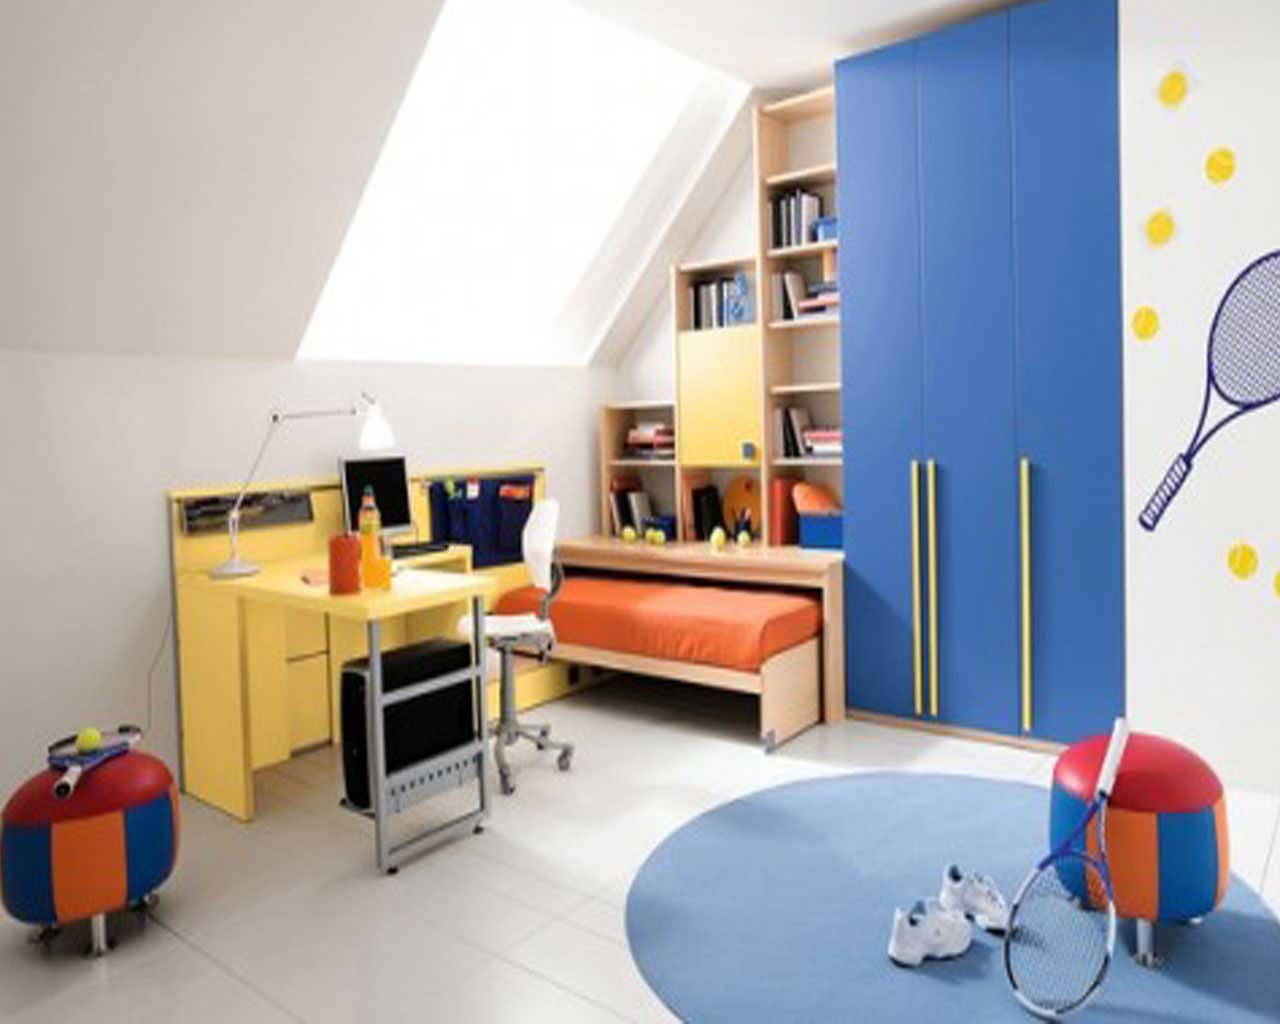 Cool Sports Boys And Kids Room Decor Design Ideas With Inspiring Laptop Study Table Designs And Modern Wall Shelves Design Ideas Plus Fresh Orange Bed Linen Color Schemes Ideas